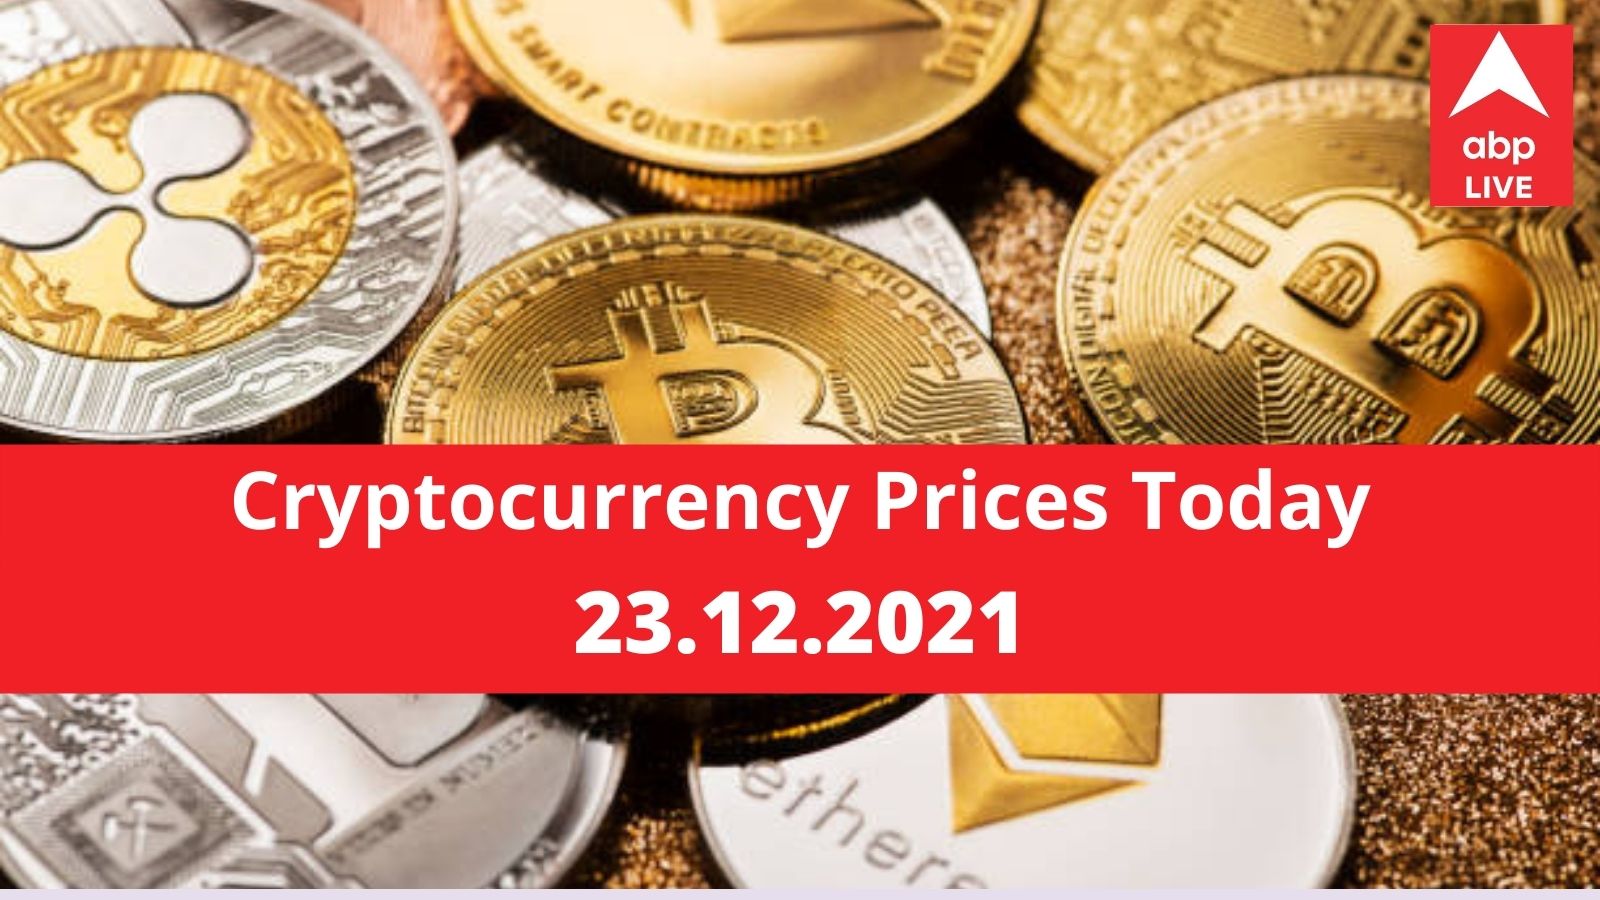 Cryptocurrency Prices On December 23 2021